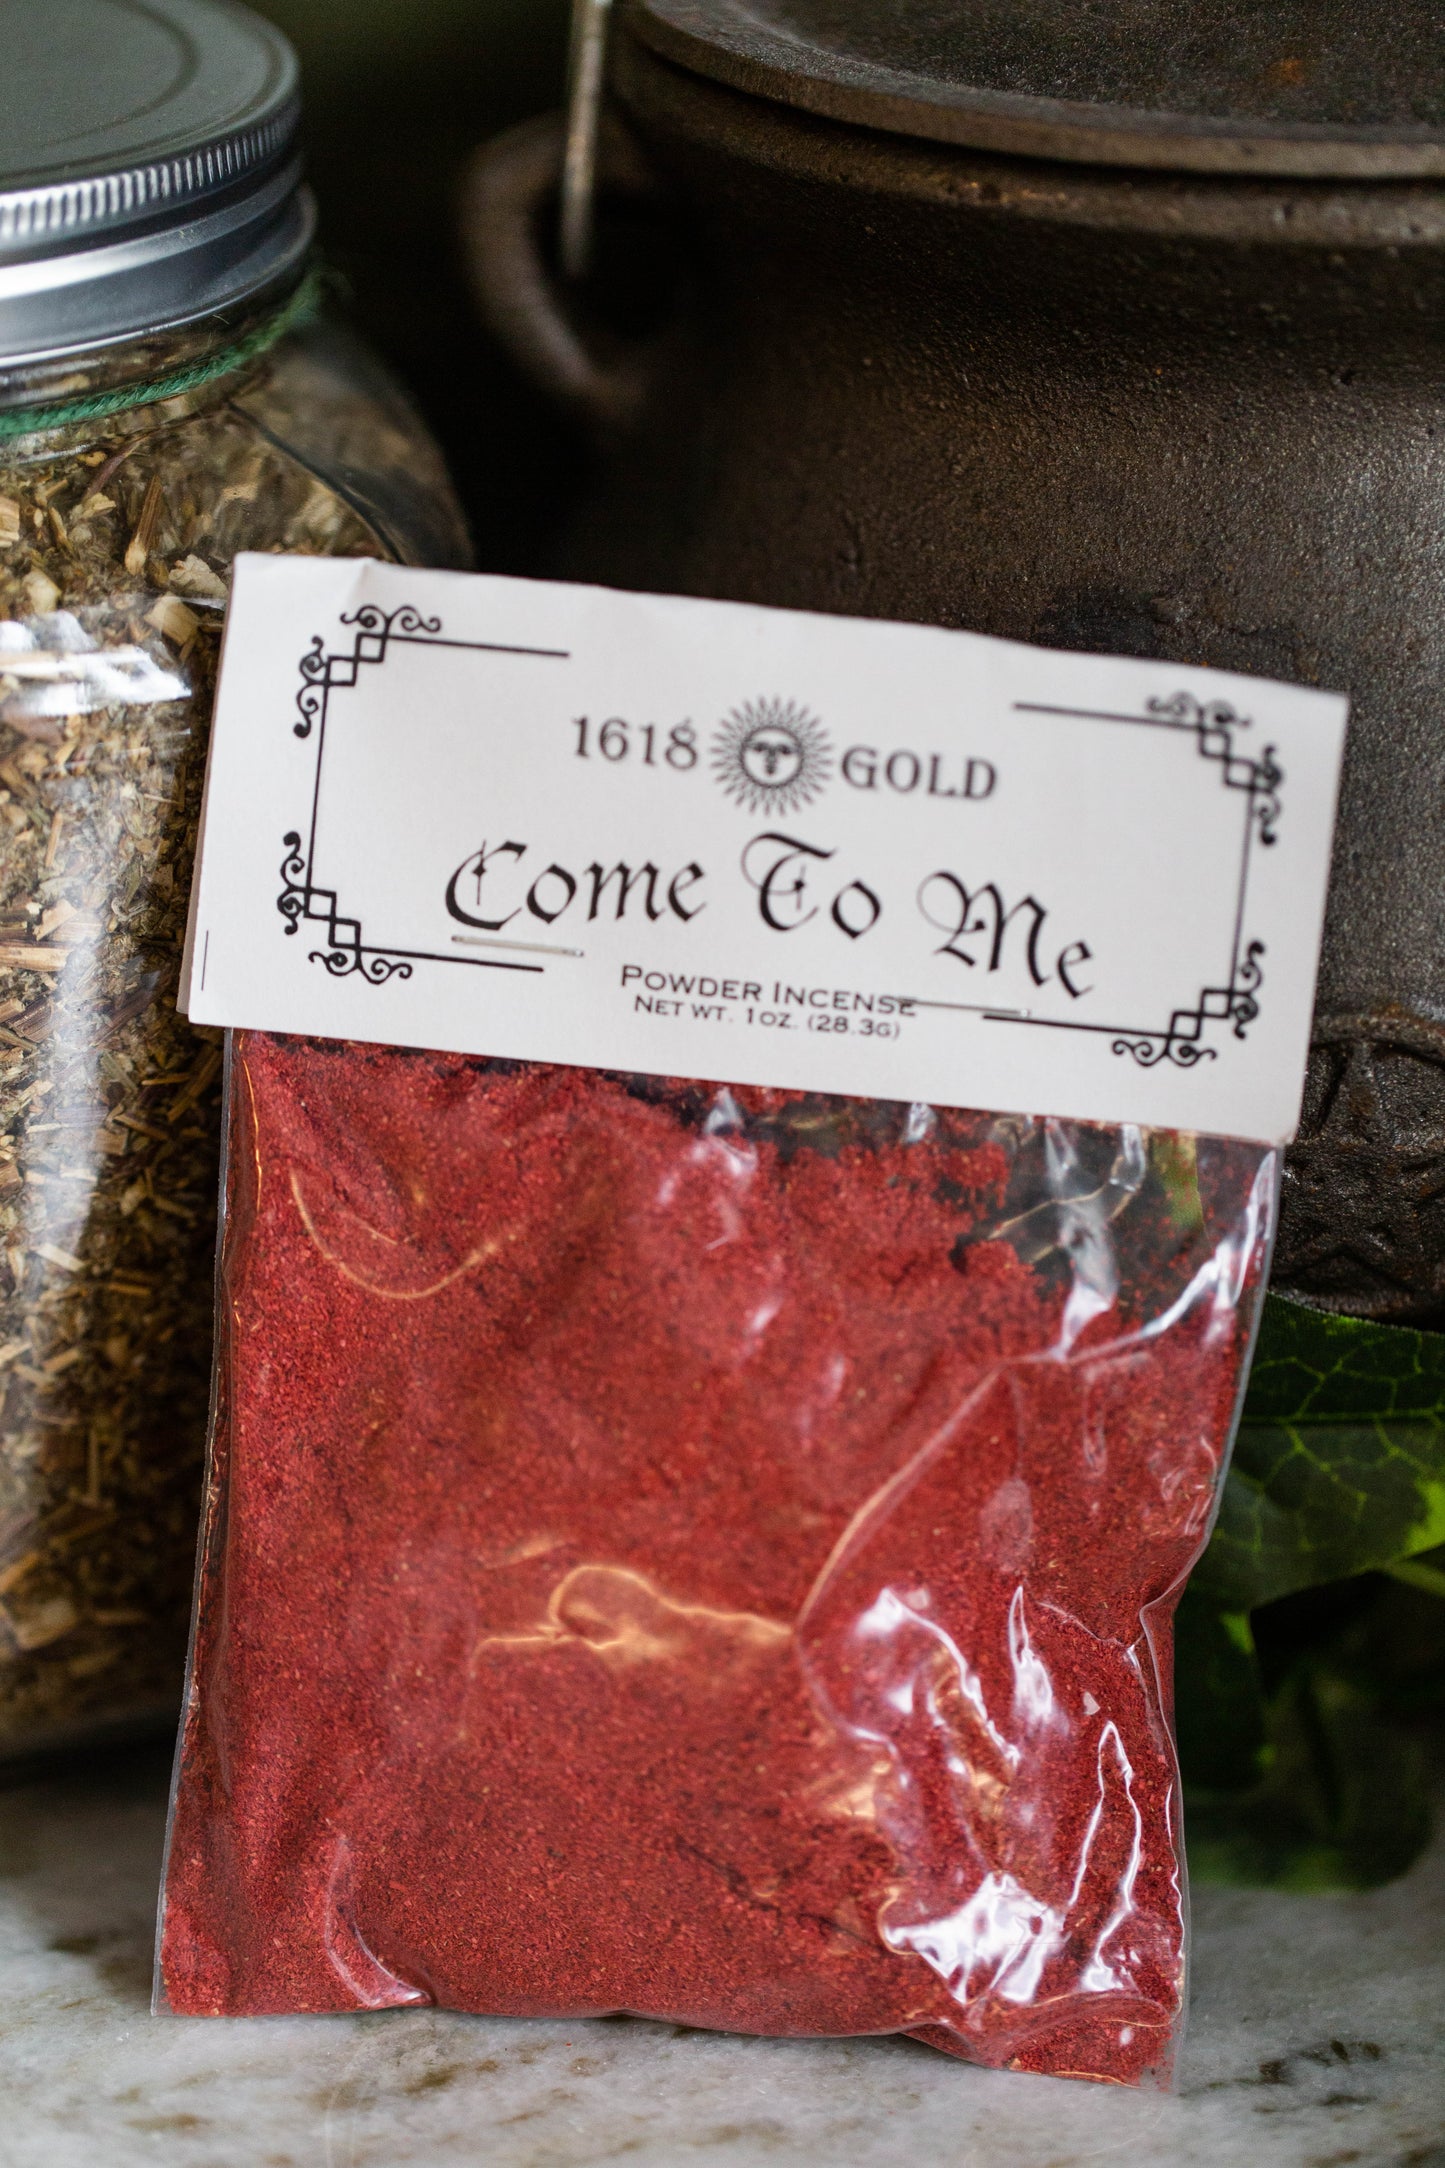 1618 Gold - COME TO ME - Powder Incense for attracting your desires towards you